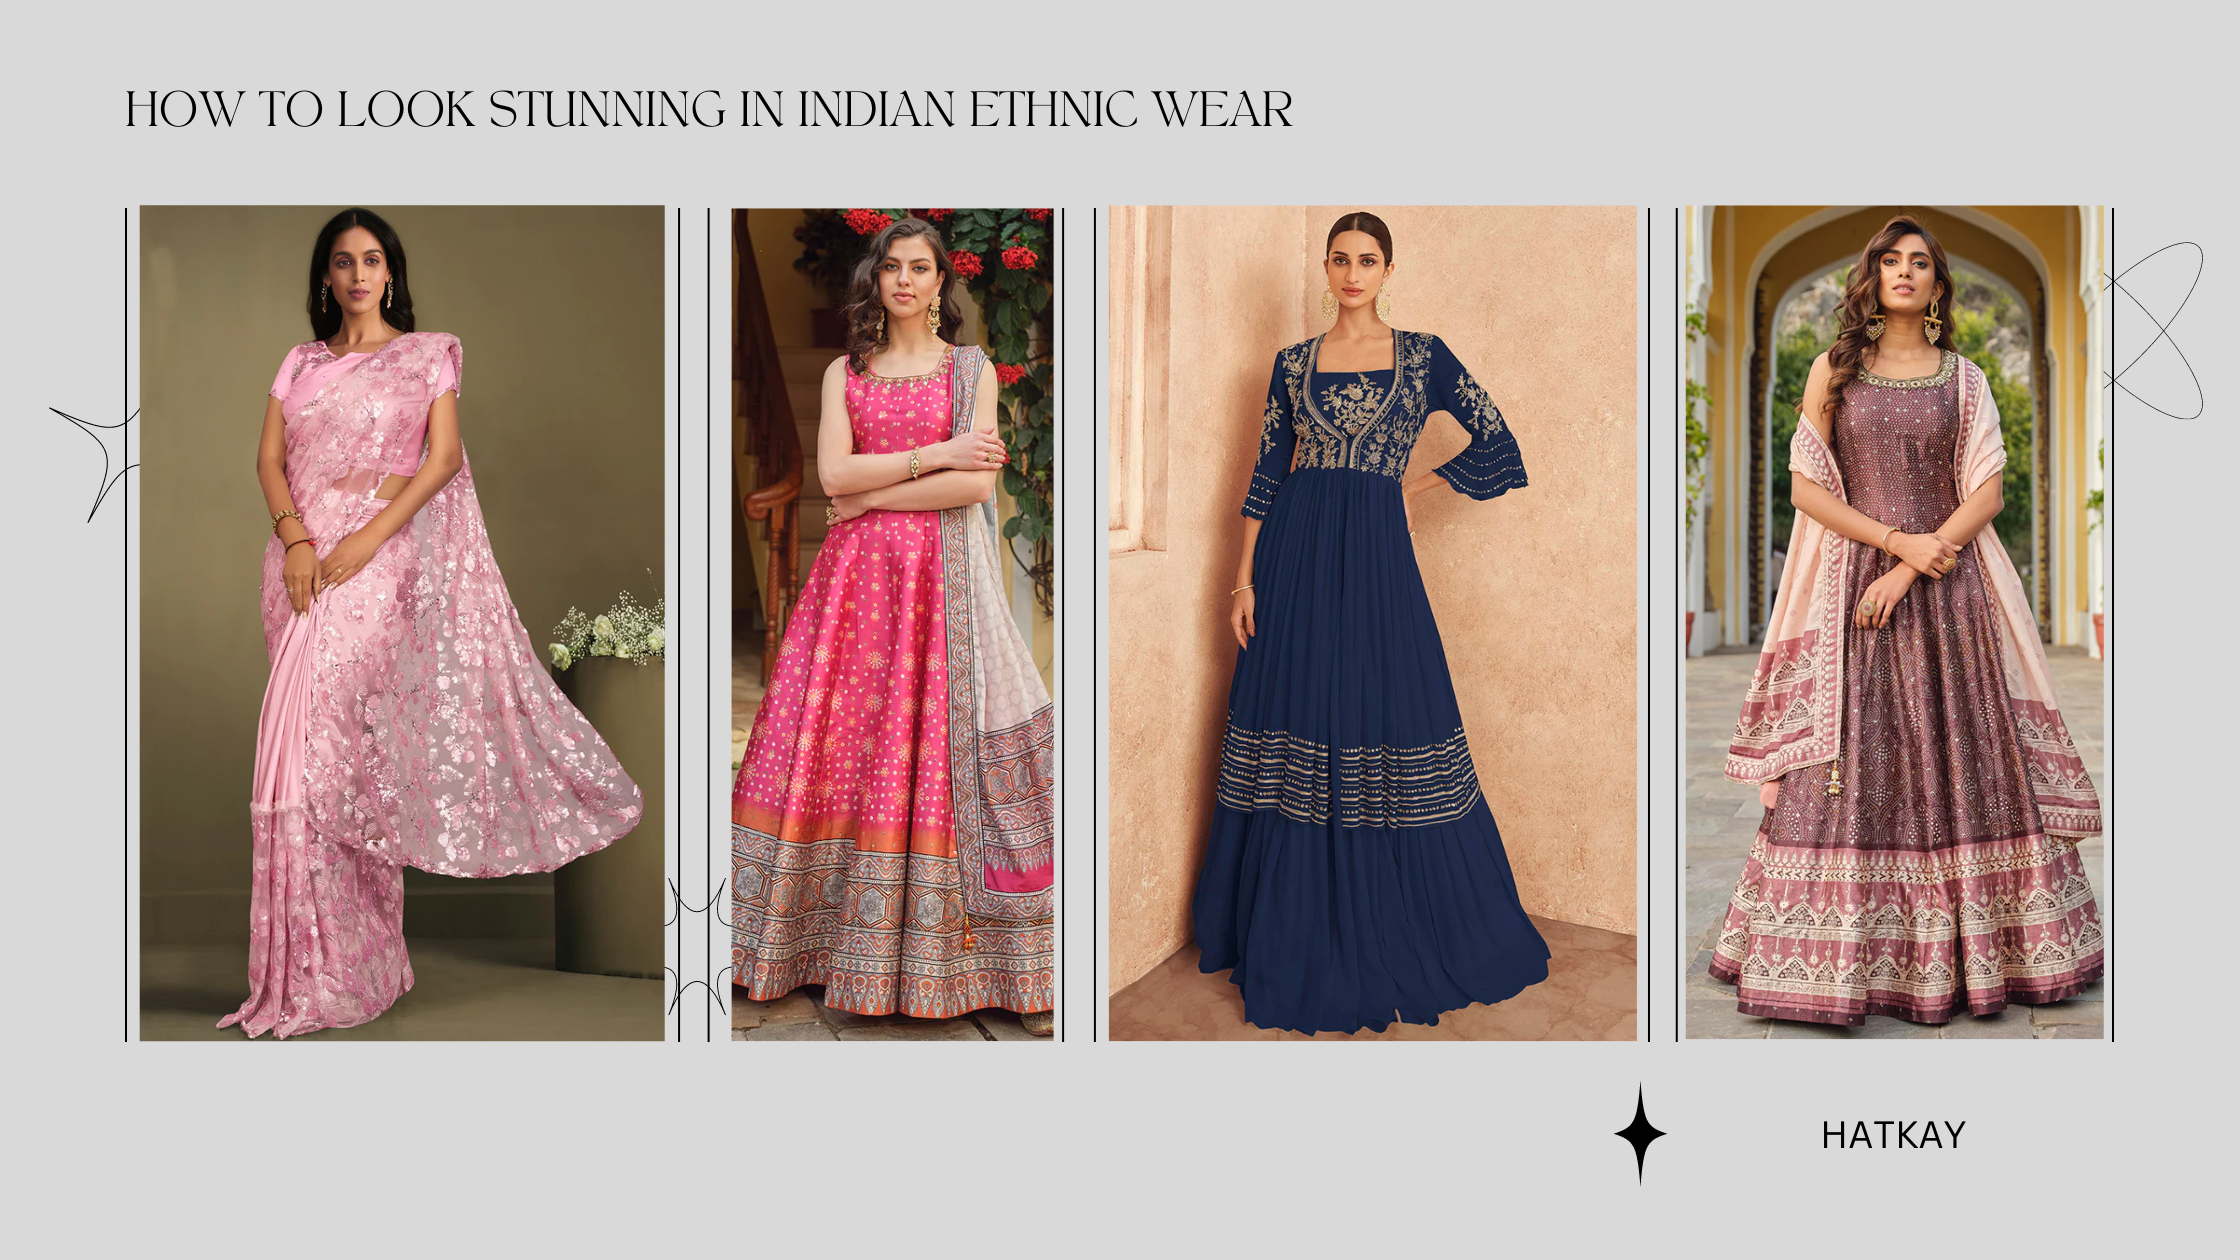 How to Look Stunning in Indian Ethnic Wear